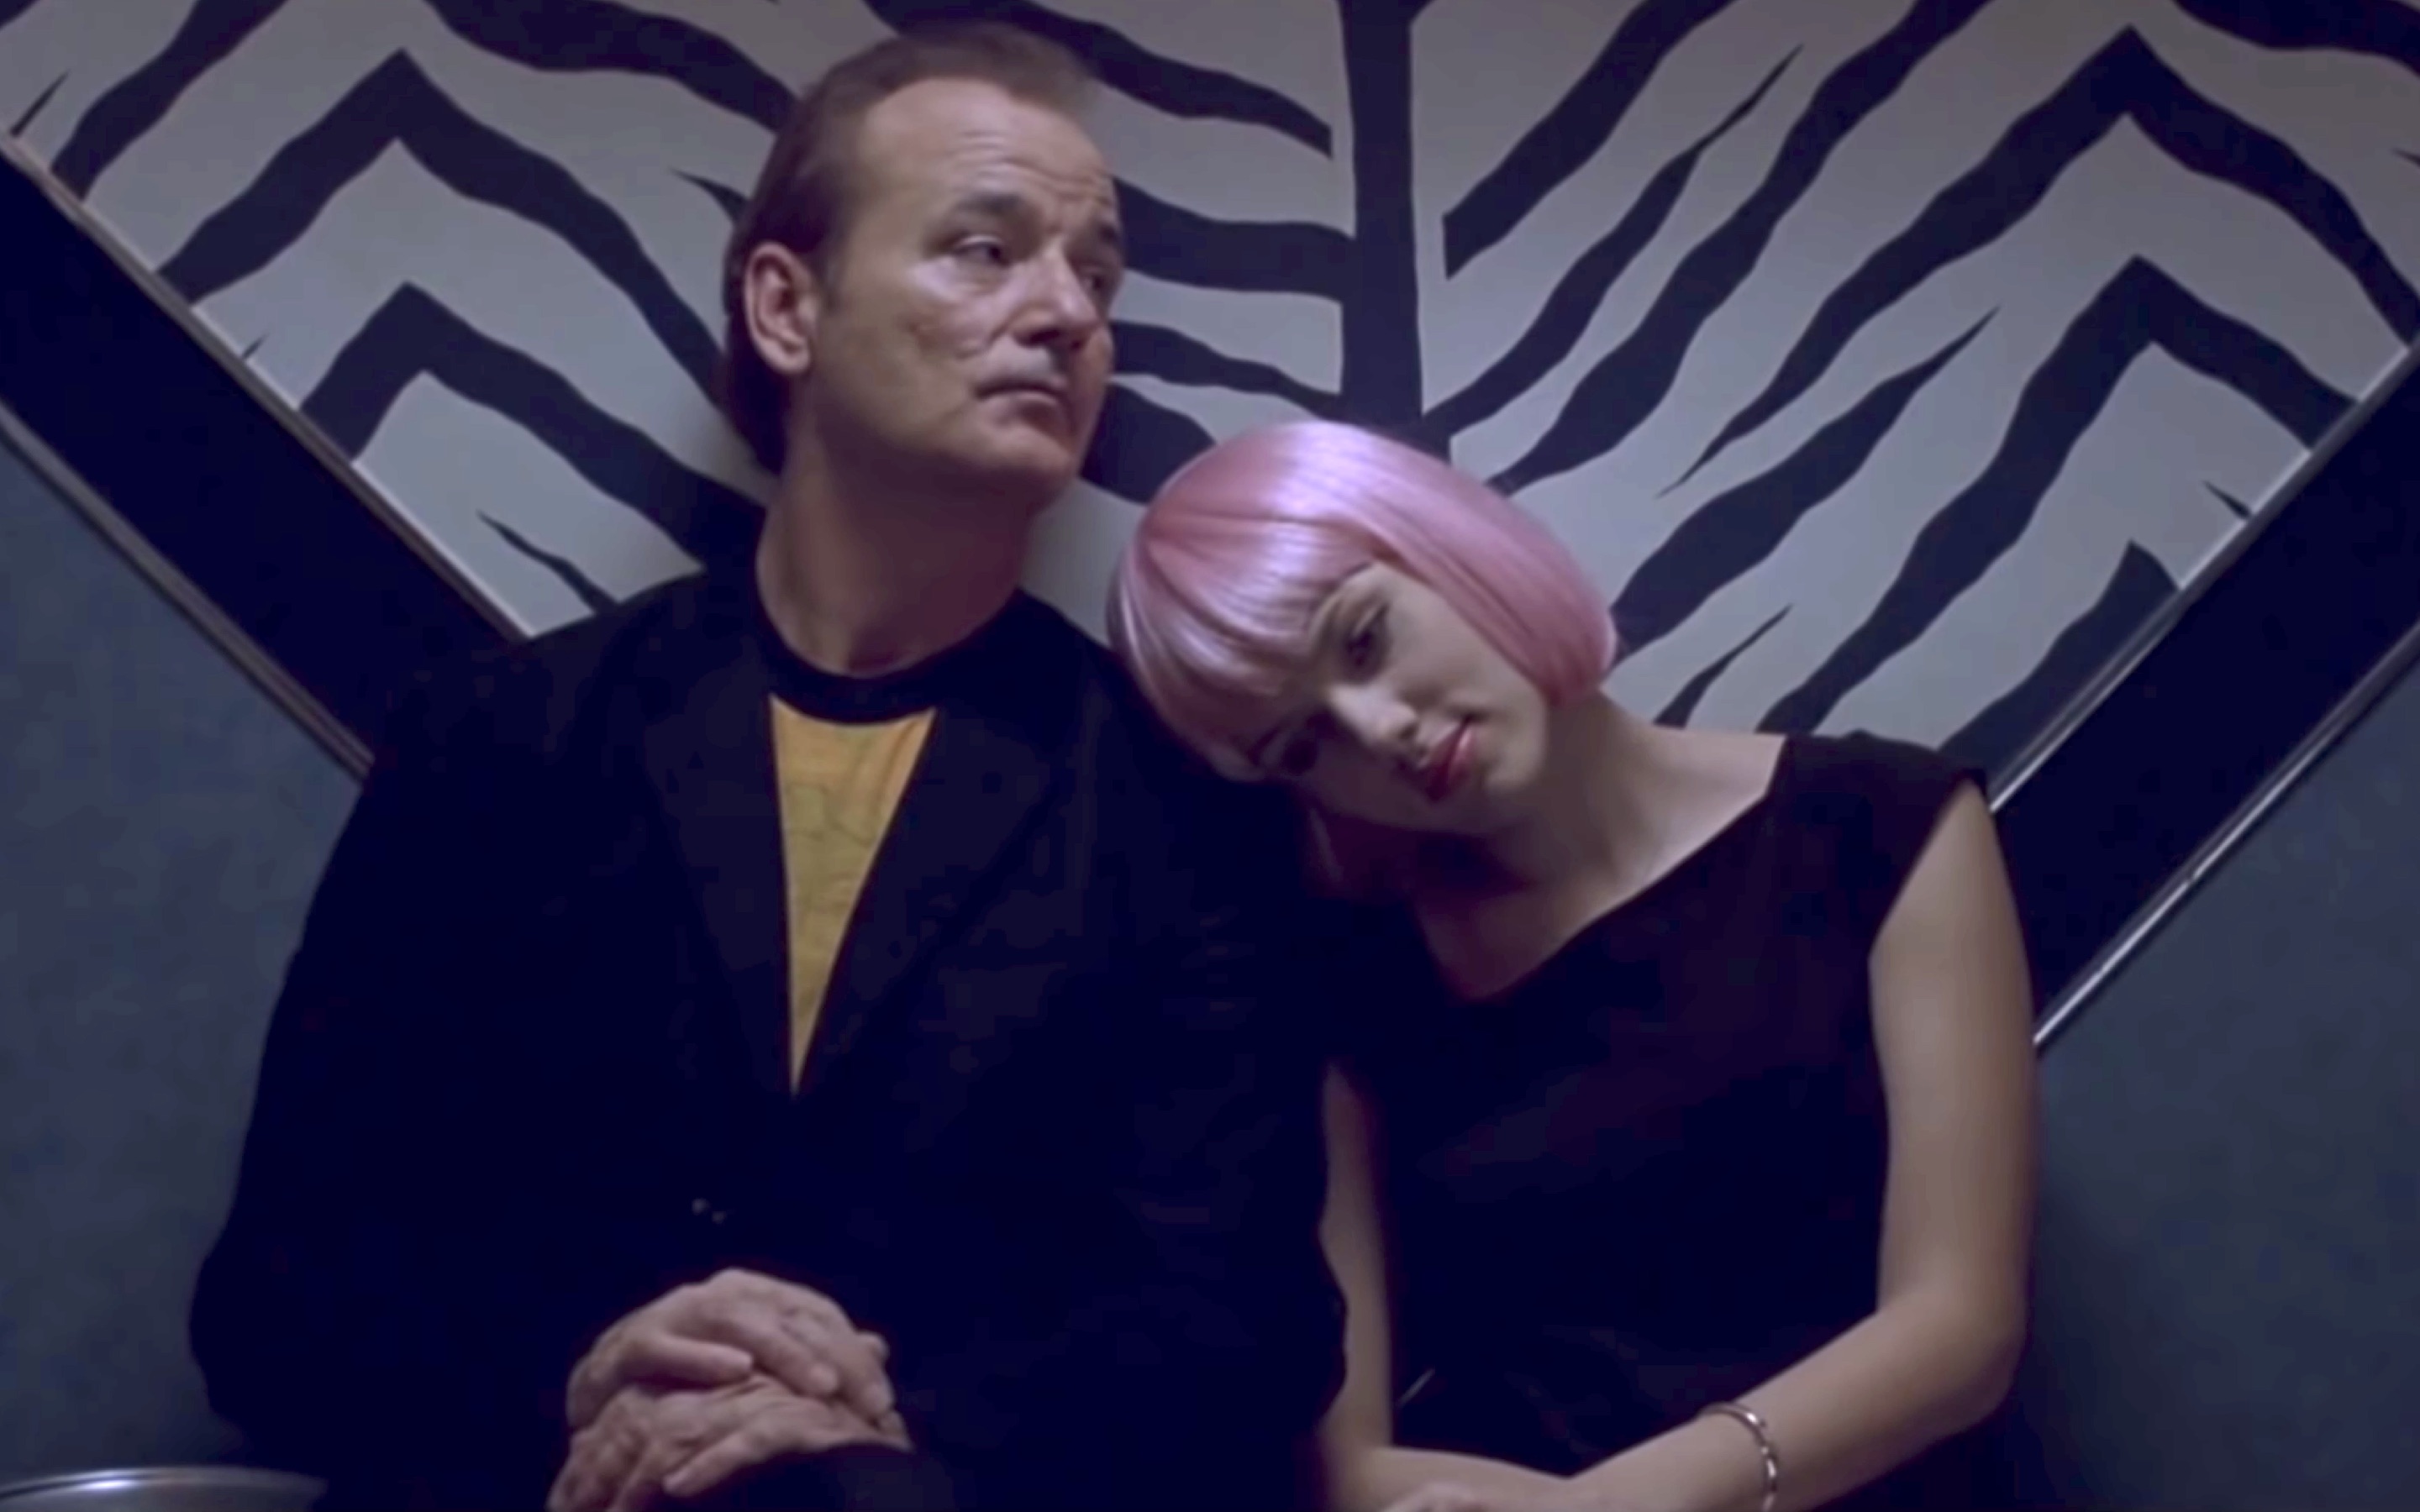 A scene from Sofia Coppola’s film <i></noscript>Lost In Translation</i> which will be screened this weekend. Screengrab via YouTube.